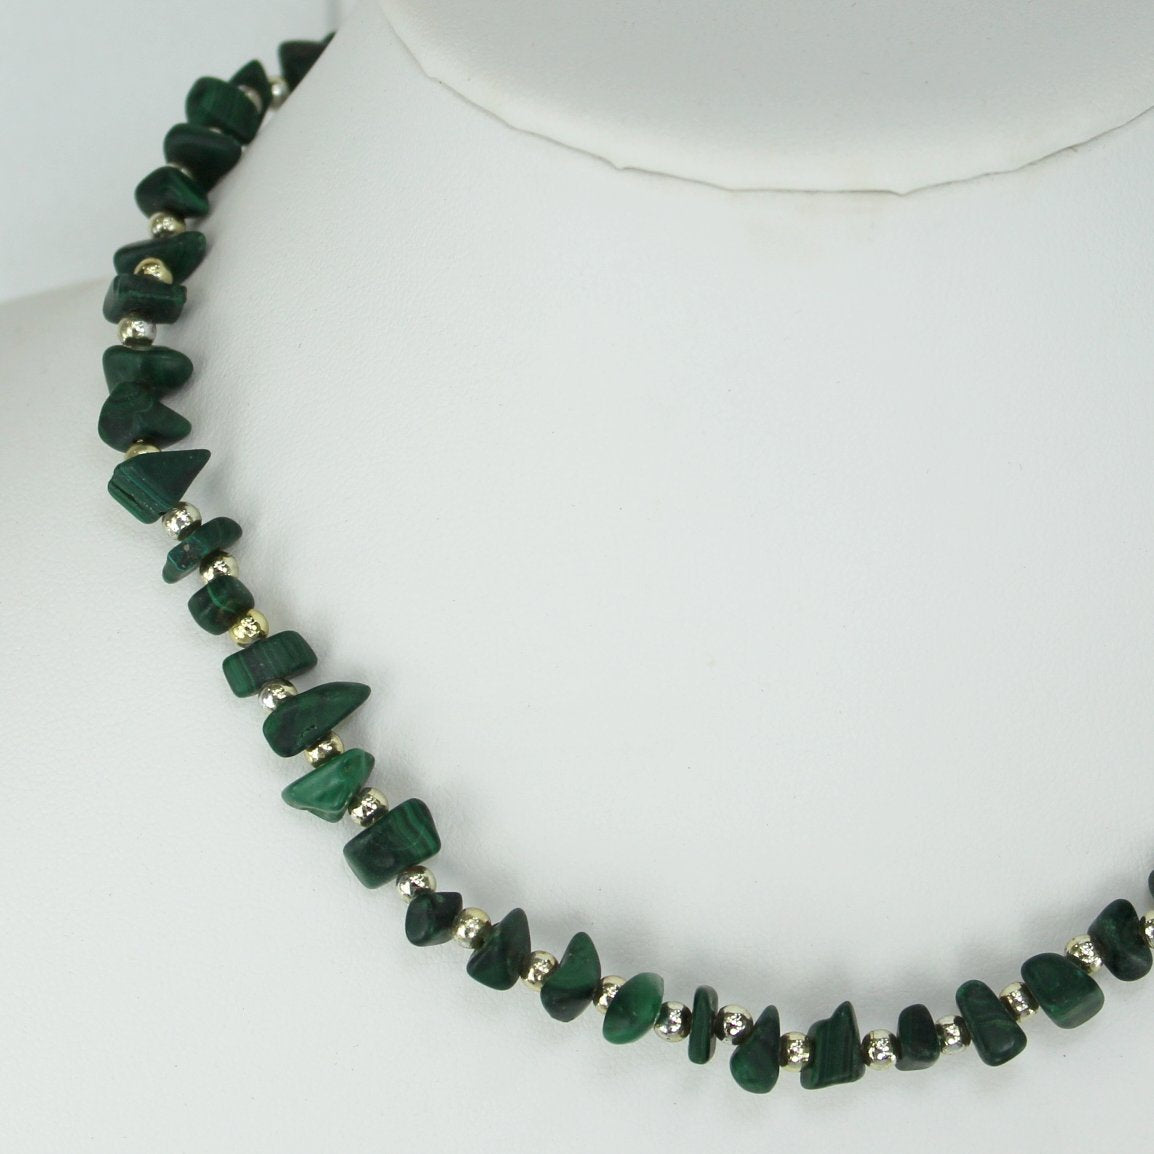 Malachite Chip Silver Bead Necklace closeup of beads